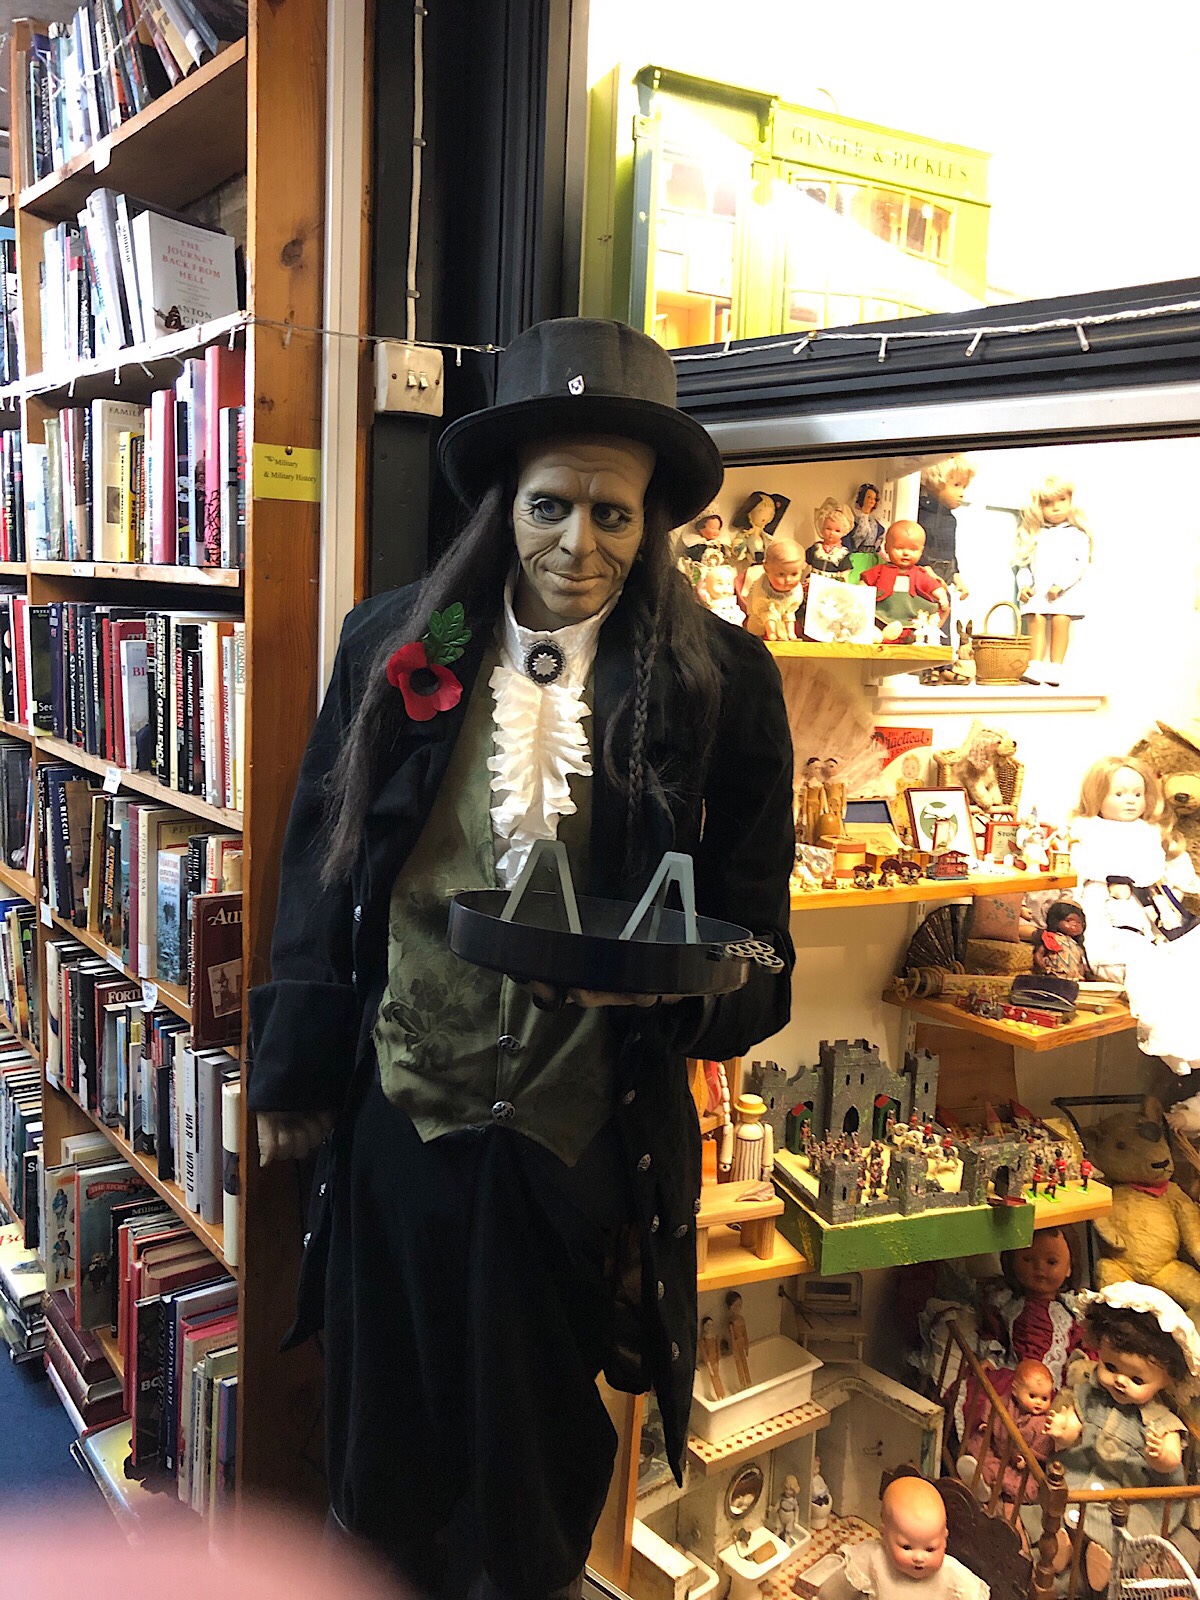 Strange and wonderful things await in The Petersfield Bookshop. Visit it when things improve, for now visit their web site